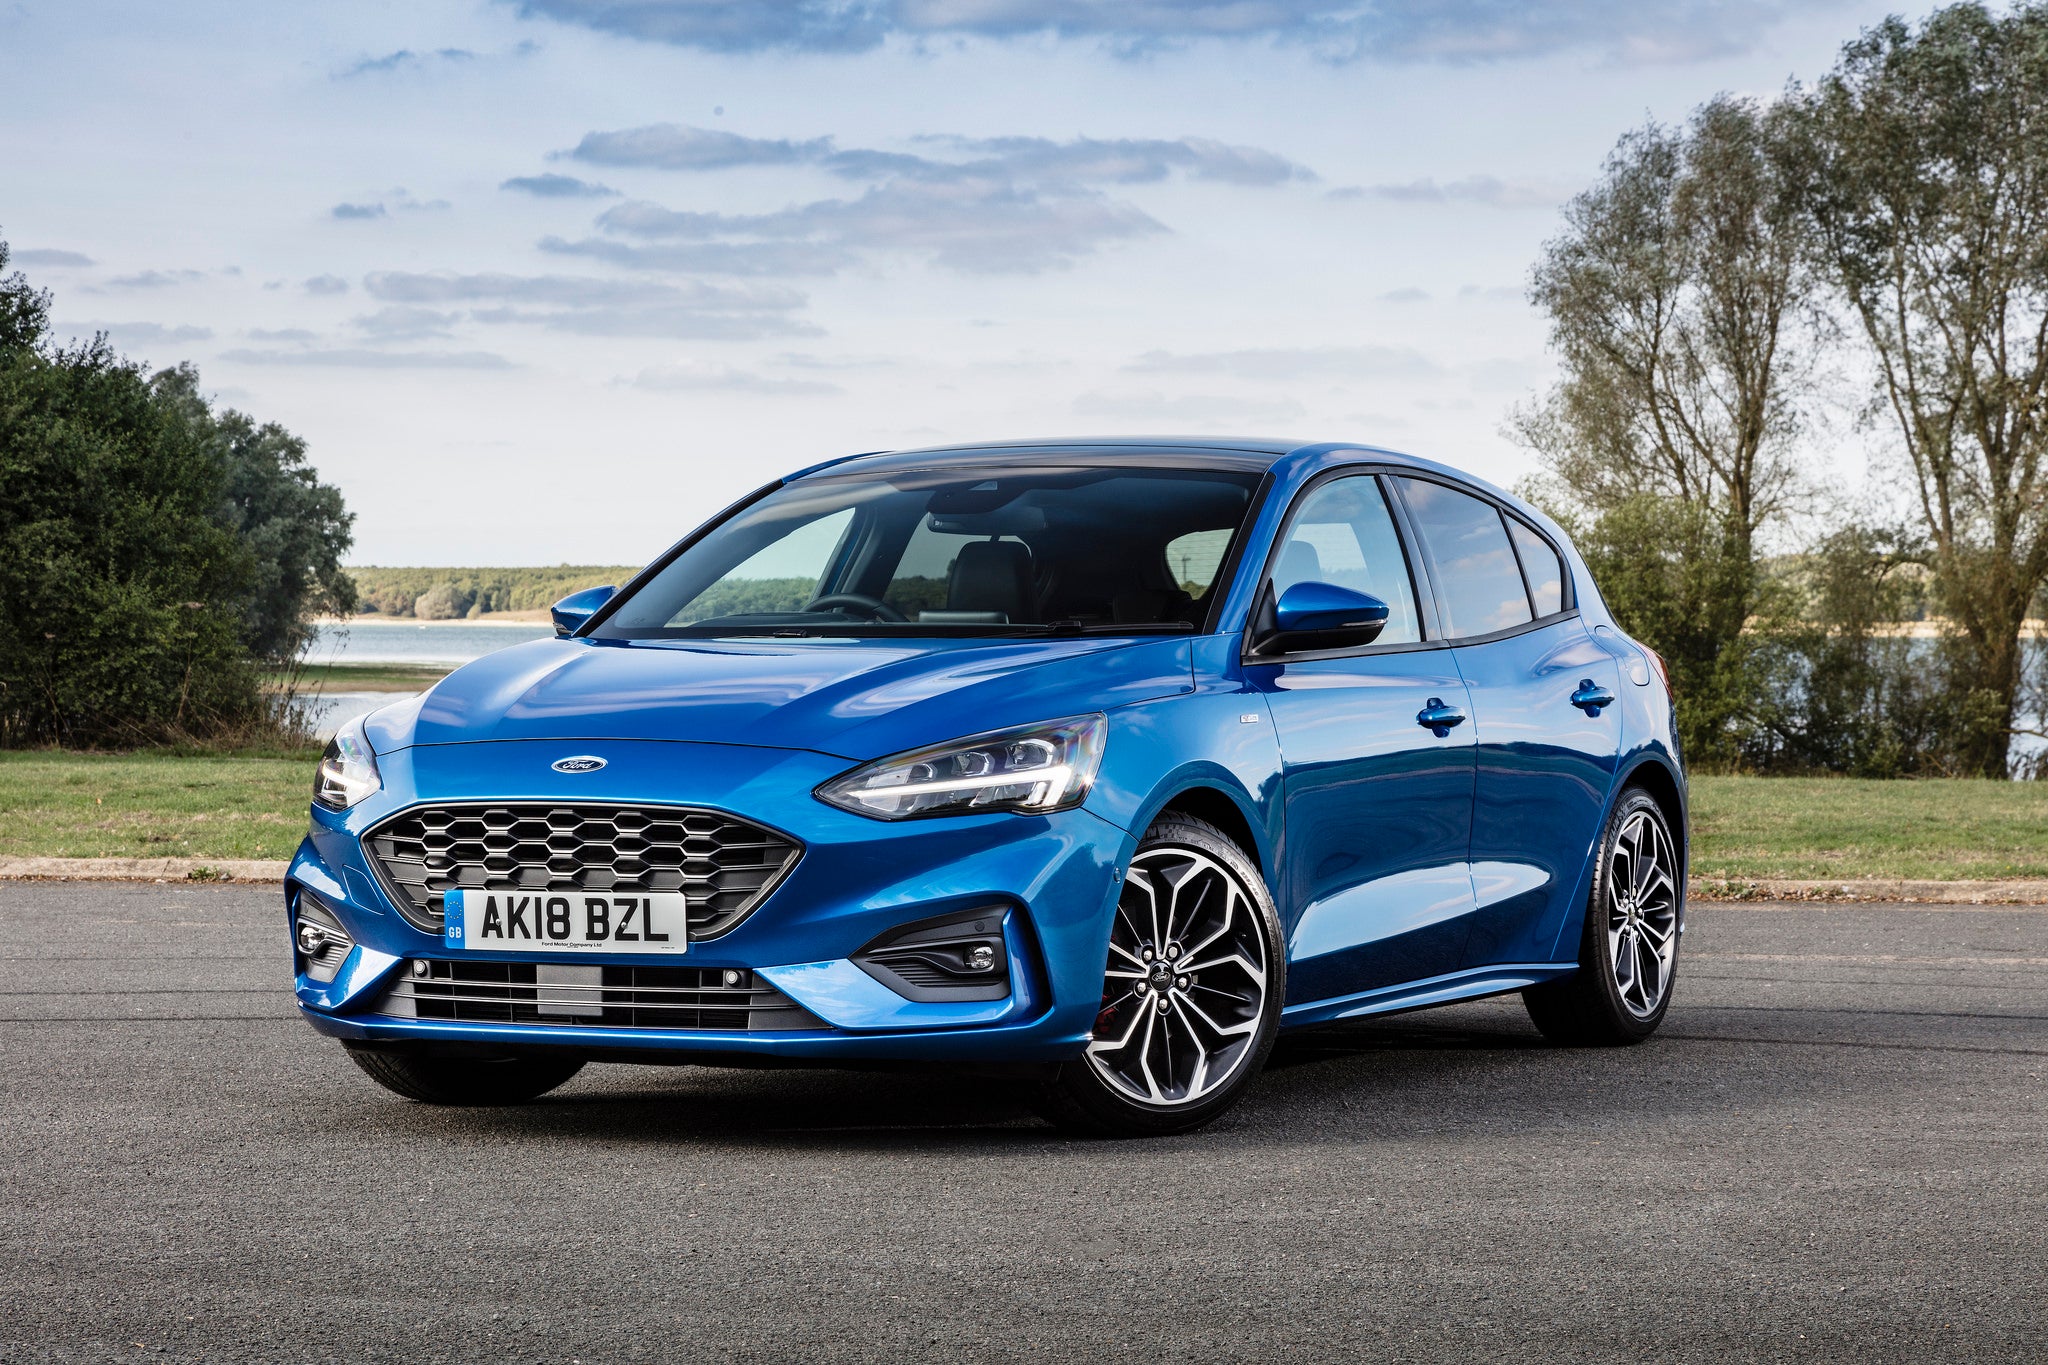 Ford Focus: New model is competitive, but not class-leading